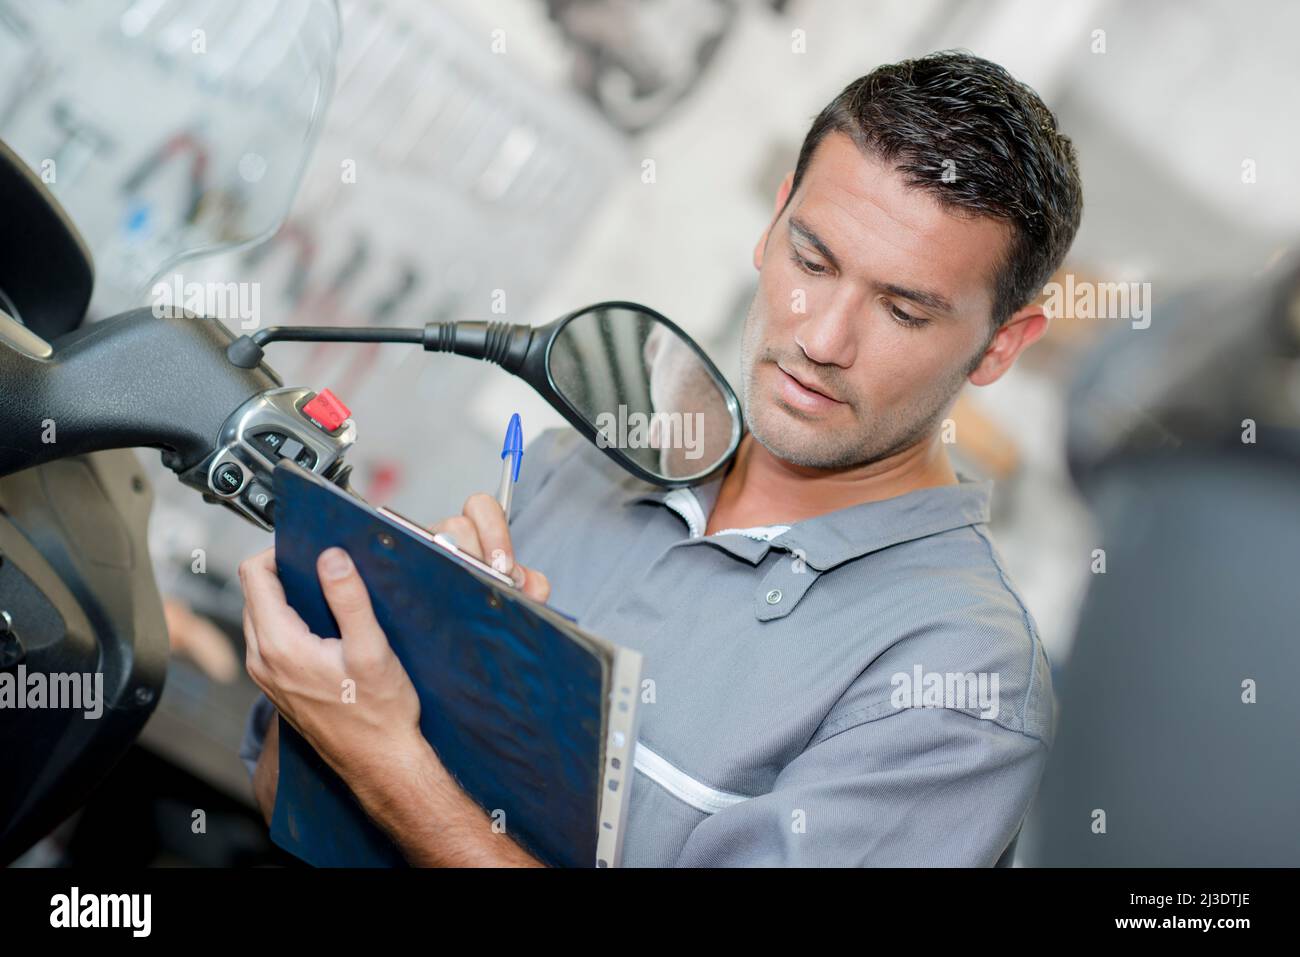 Mechanic making notes on clipboard Stock Photo